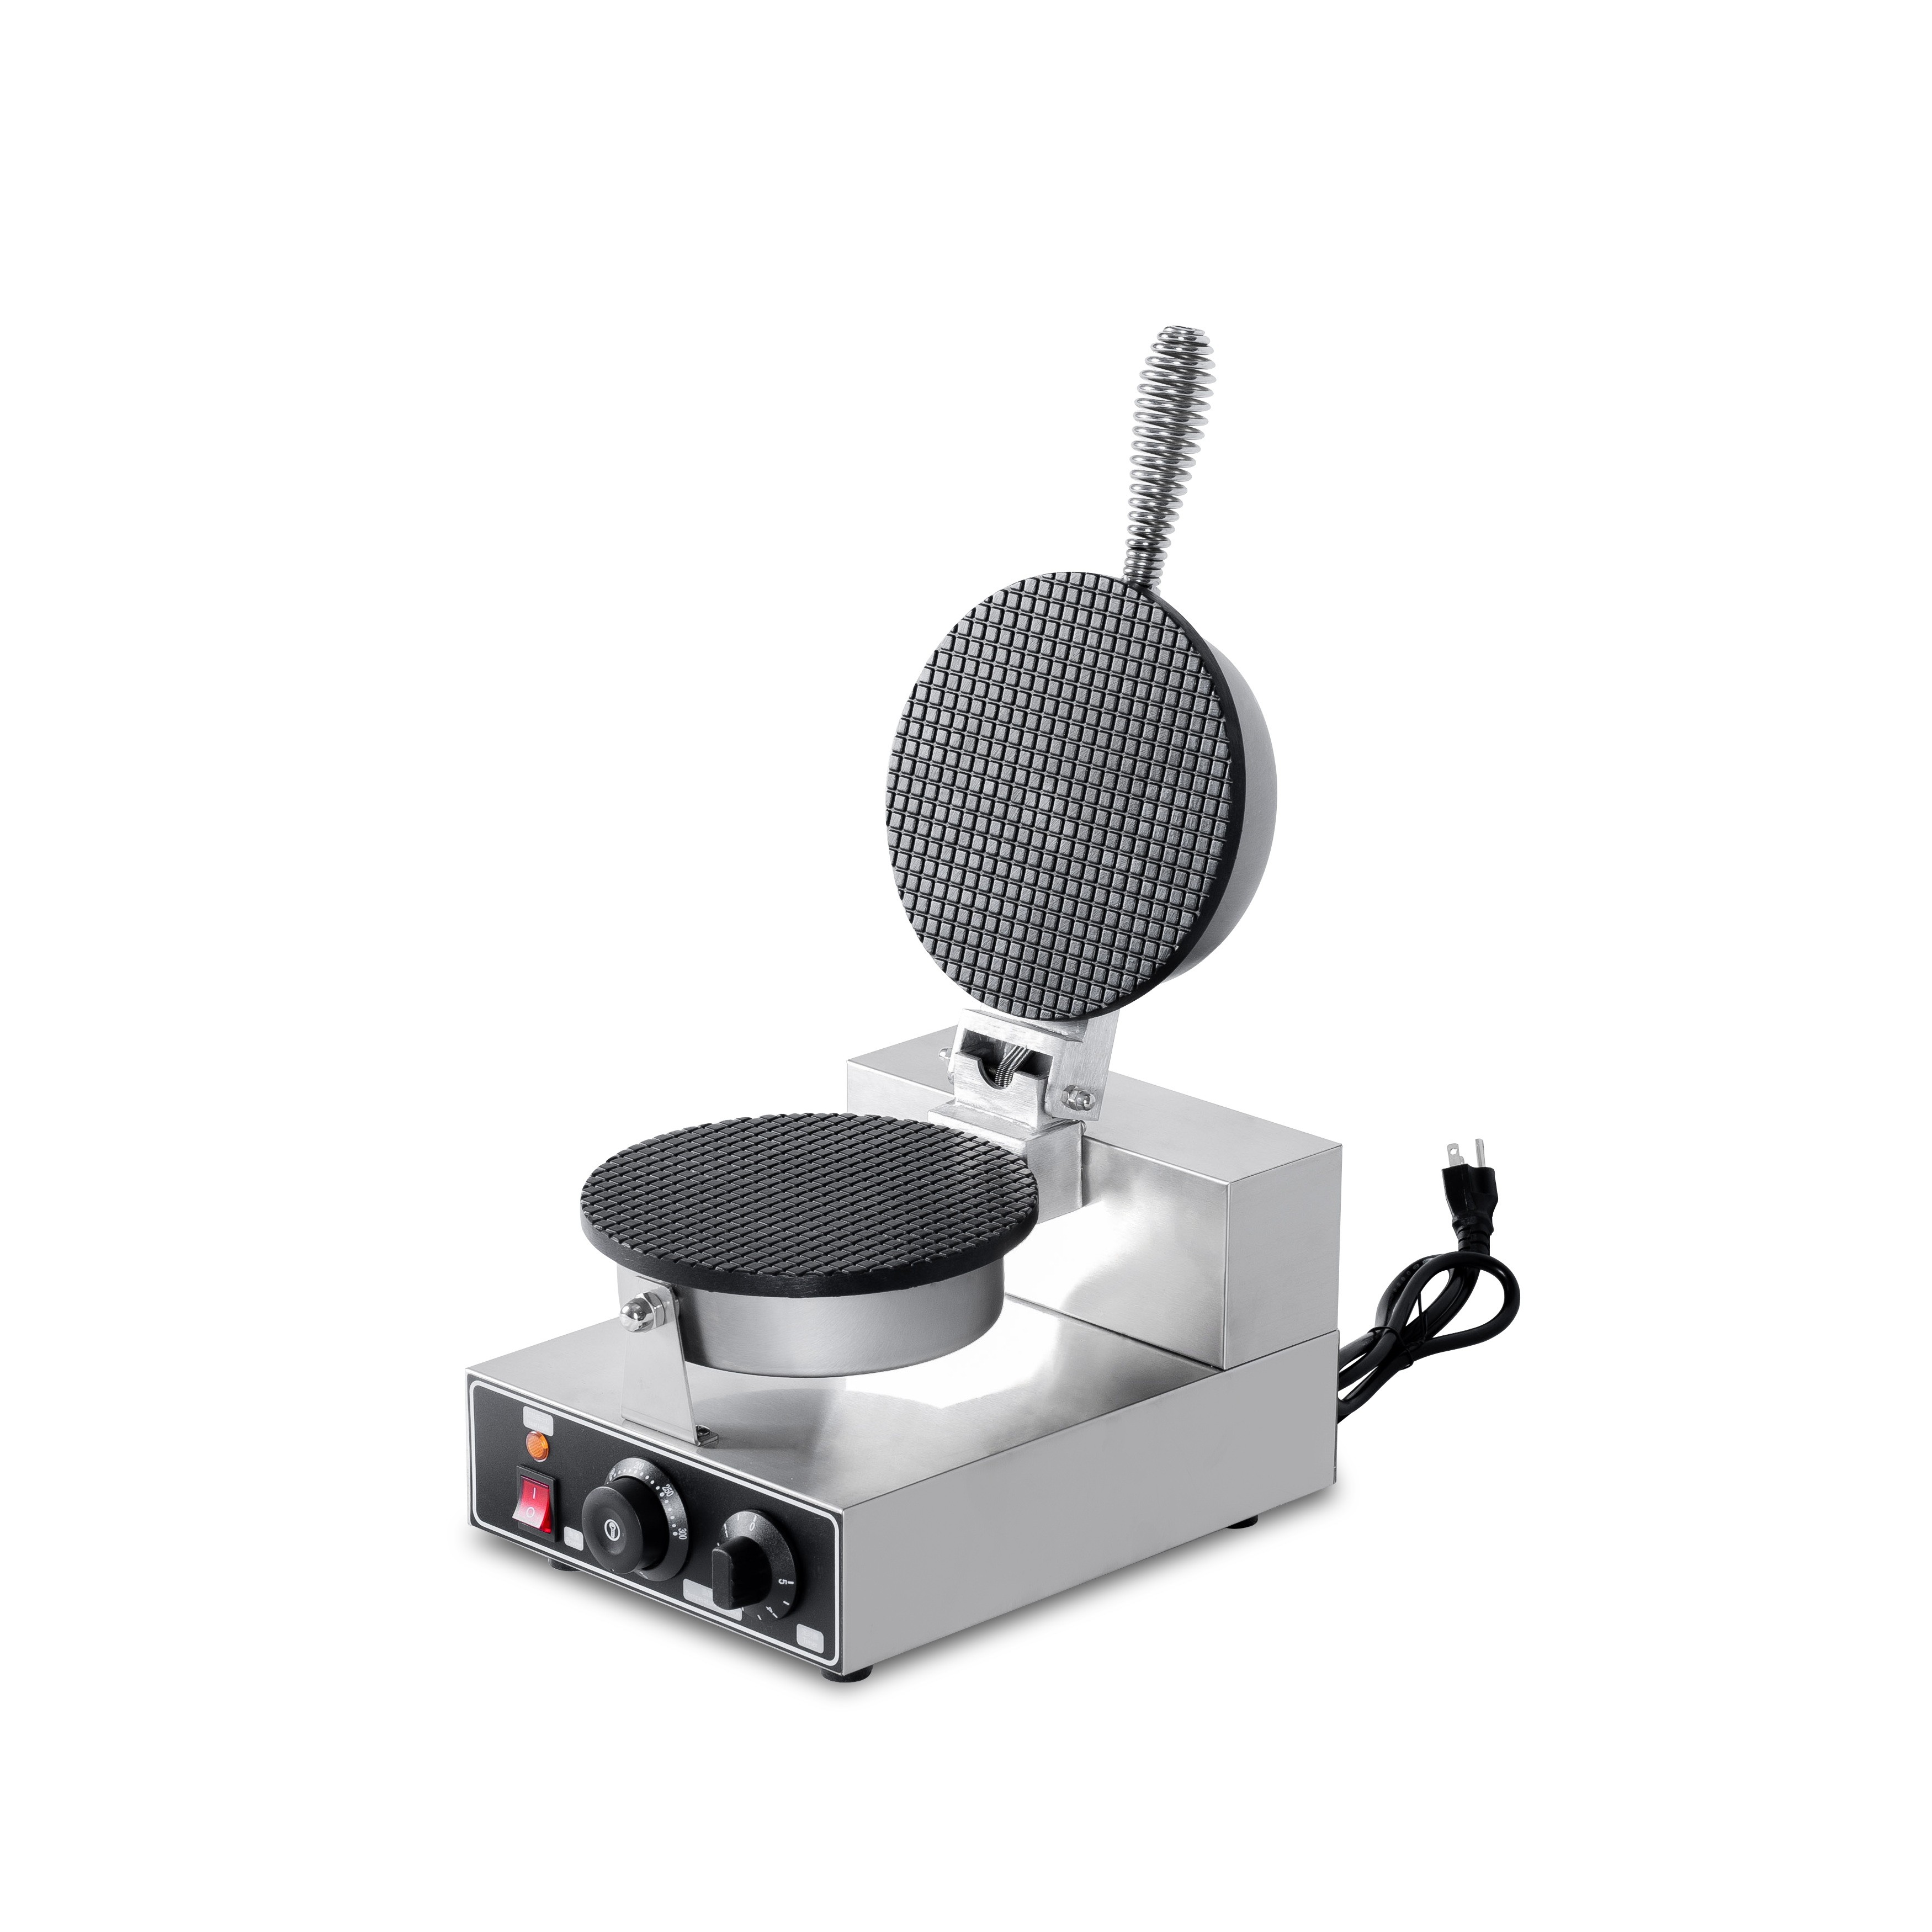 https://media.twothousand.com/catalog/product/cache/1/image/9df78eab33525d08d6e5fb8d27136e95/n/o/non-stick_round_shape_commercial_ice_cream_cone_waffle_maker_tts-1a_-_opening_waffle_maker_side_view.jpg